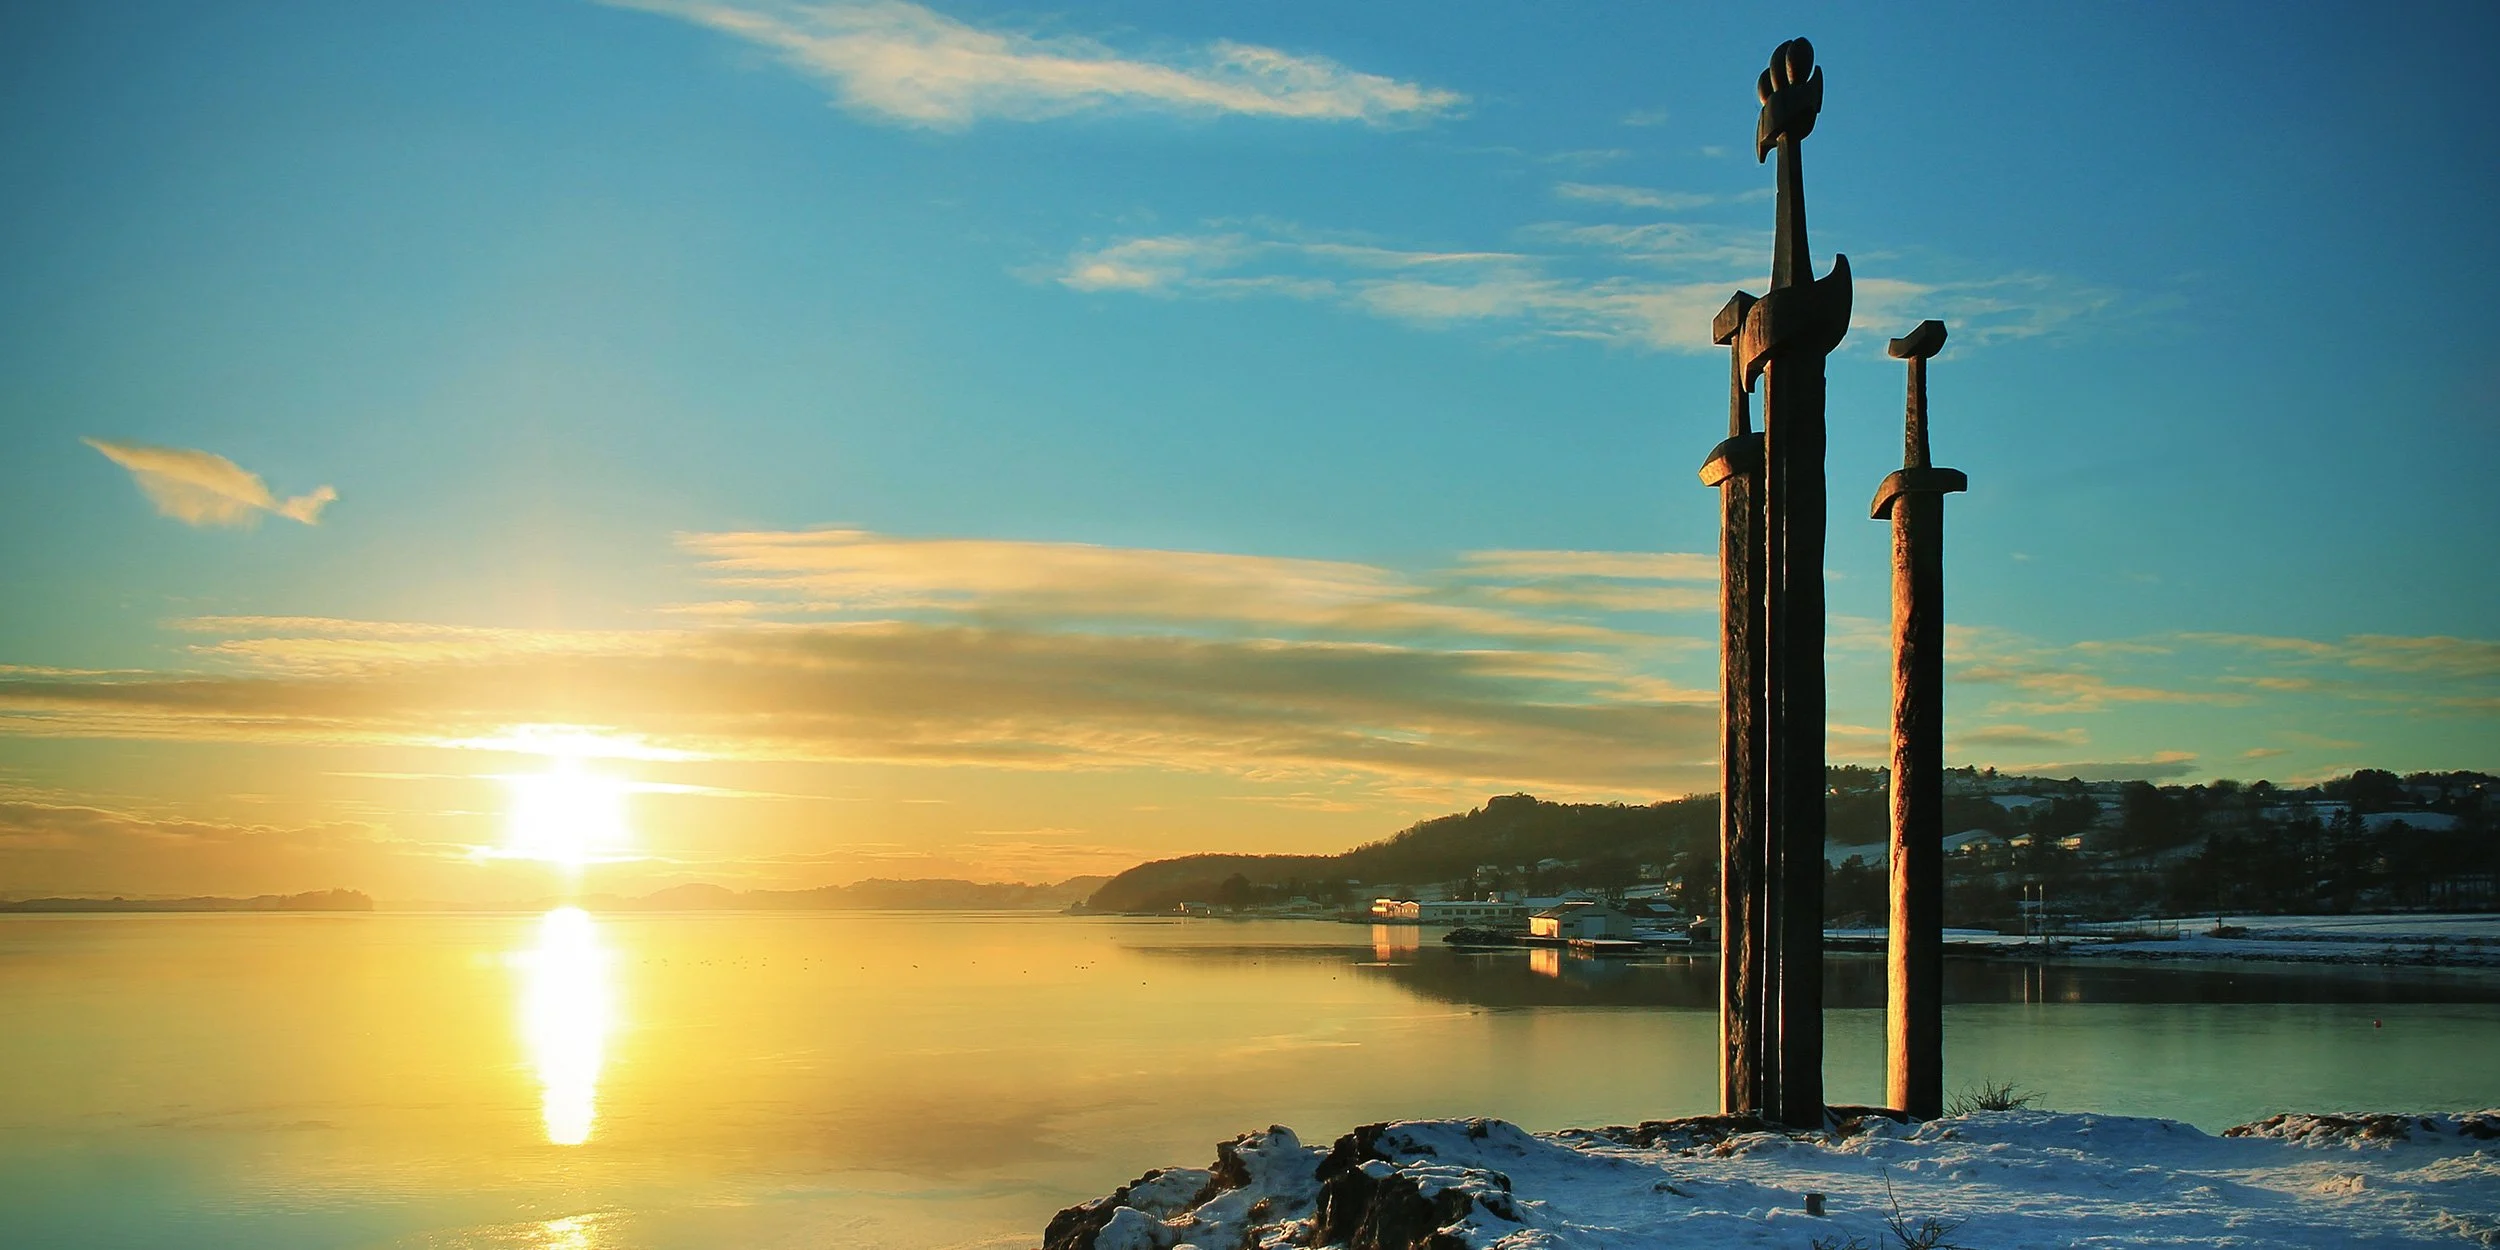 day-13_stavanger_swords-to-remine-about-the-battle-of-hafrsfjord_1_shutterstock.jpg